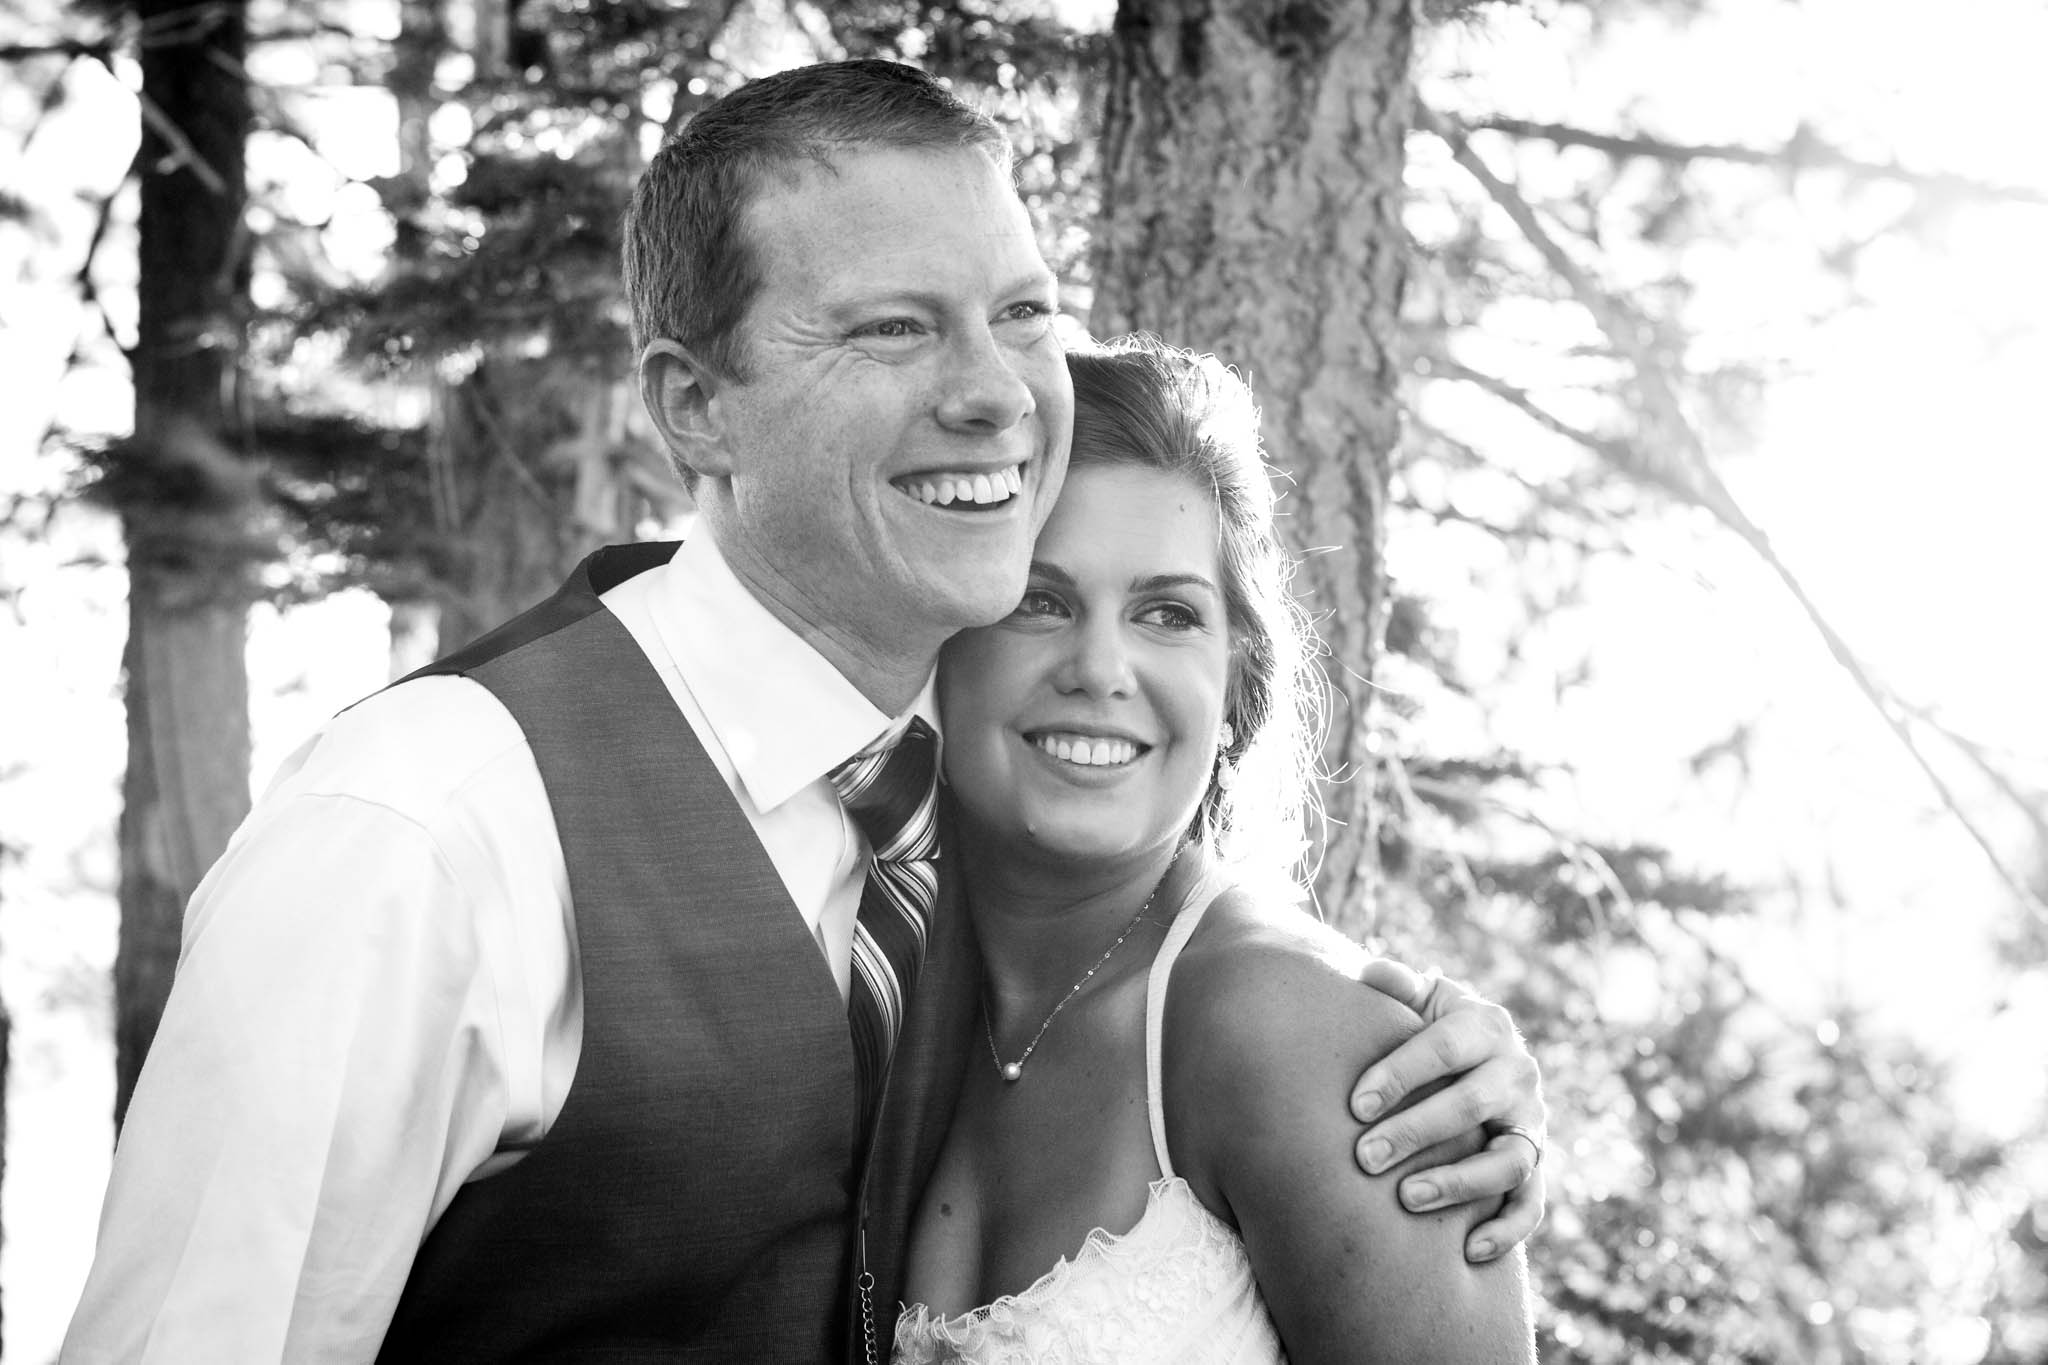 bride and groom candid portrait – North Lake Tahoe Incline Village wedding photography